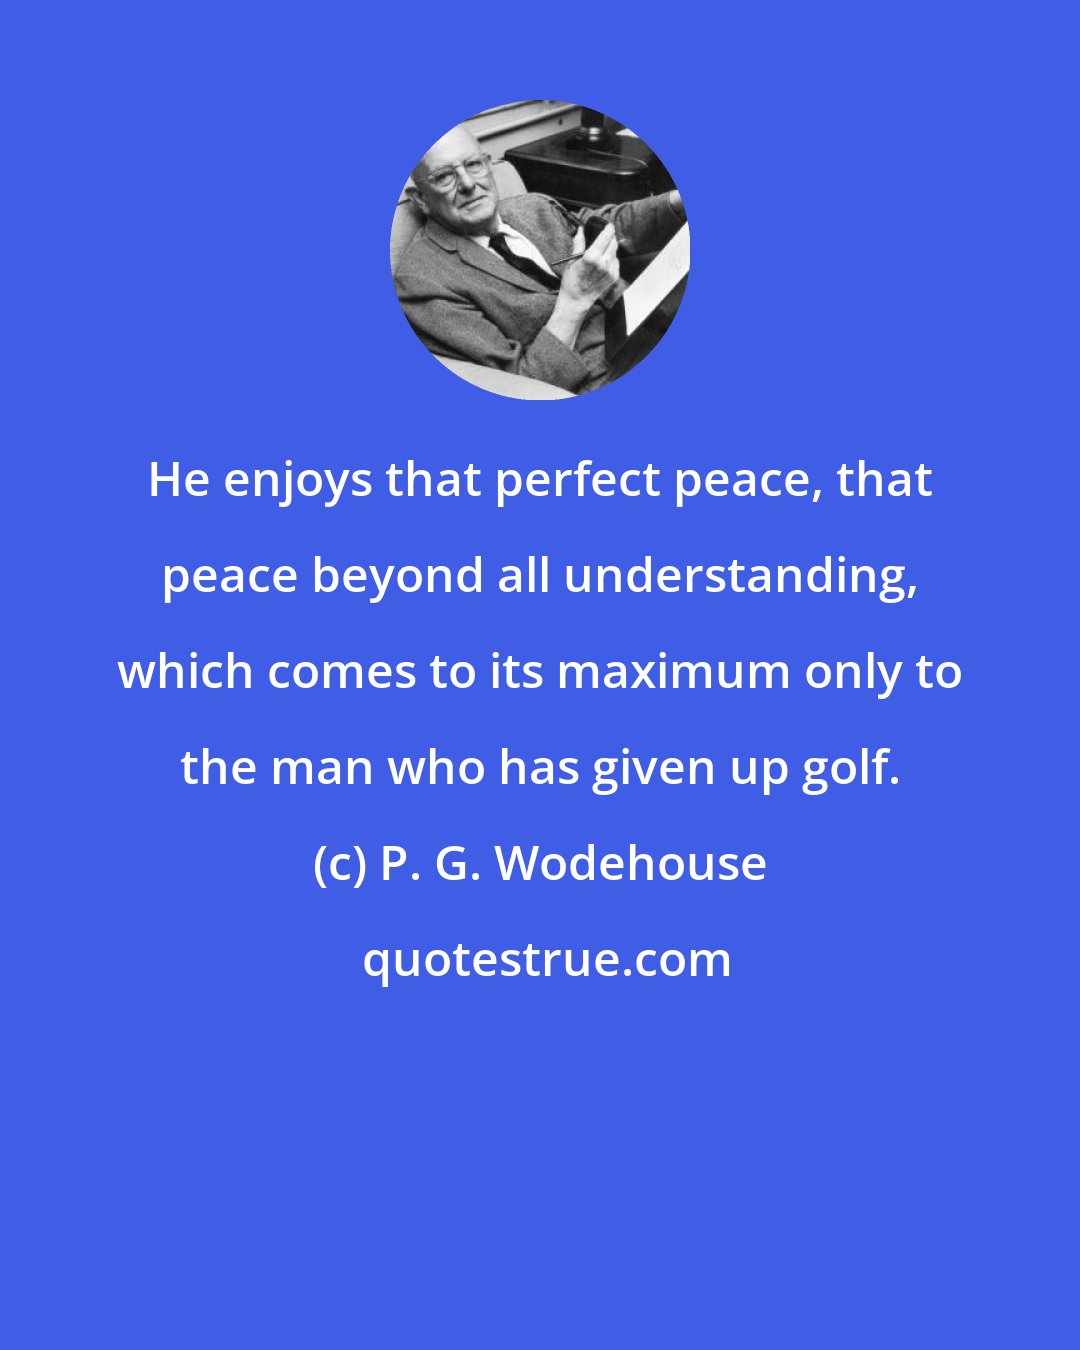 P. G. Wodehouse: He enjoys that perfect peace, that peace beyond all understanding, which comes to its maximum only to the man who has given up golf.